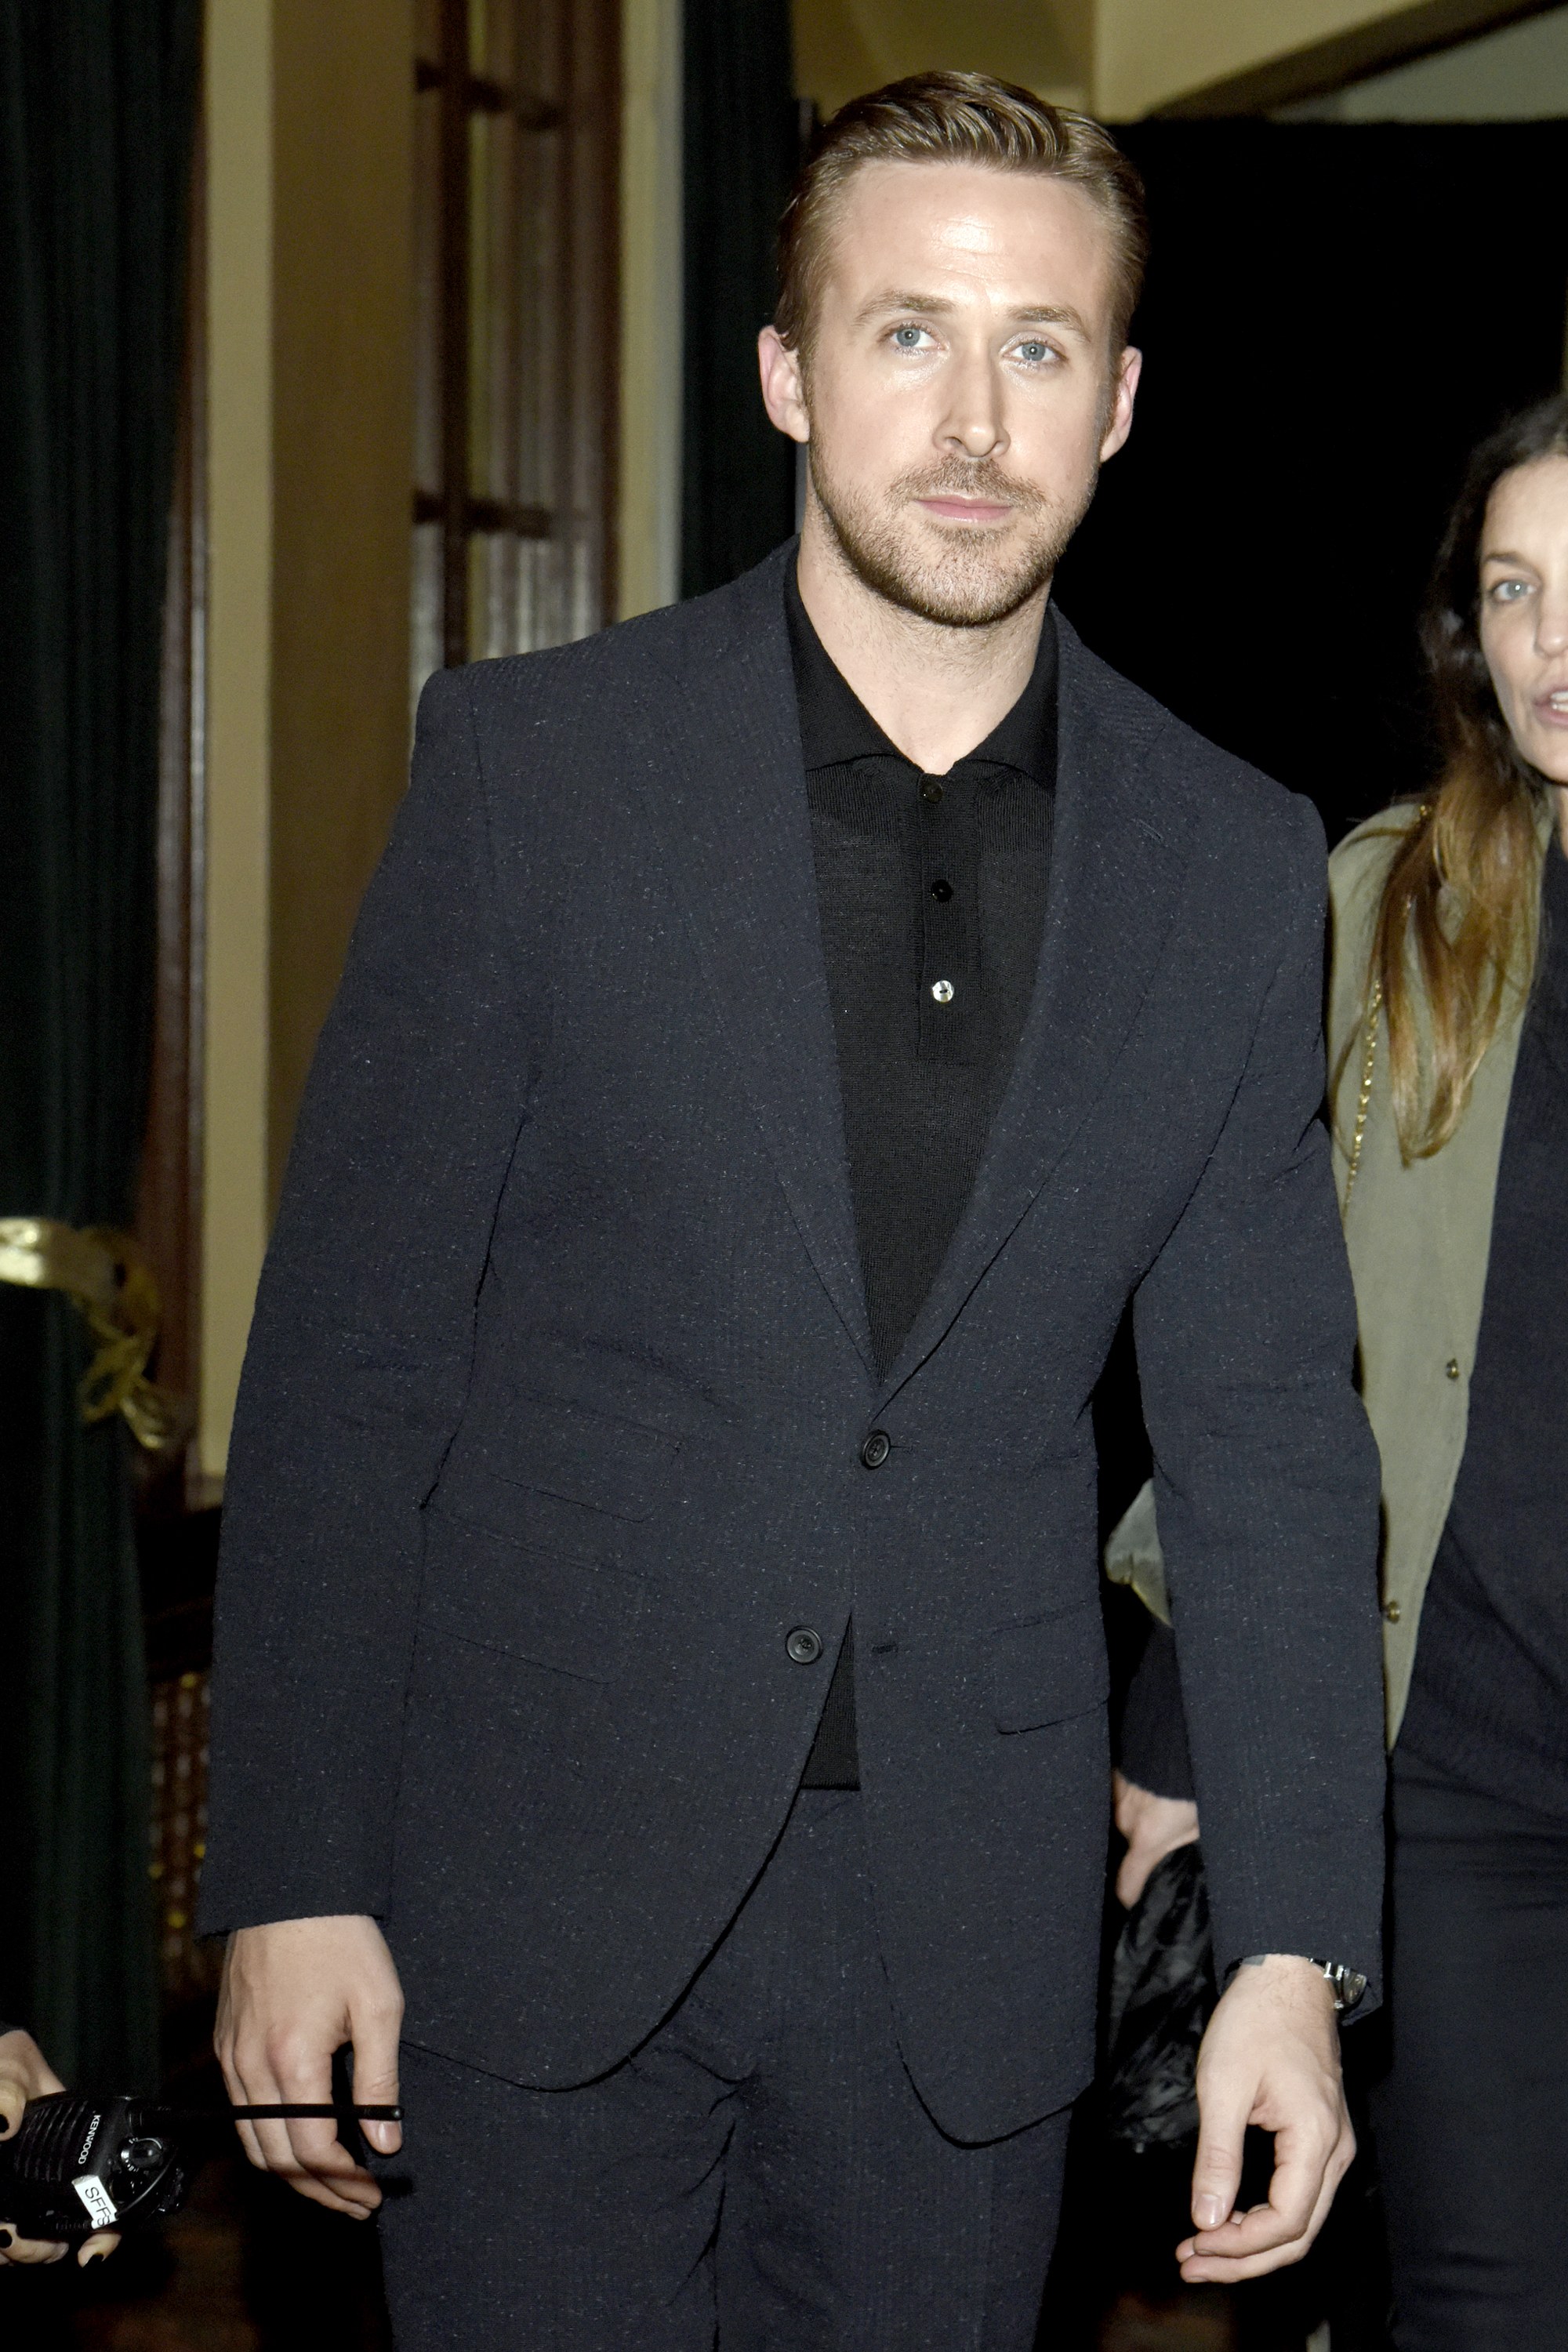 Actor Ryan Gosling wears a black polo shirt under a dark gray suit